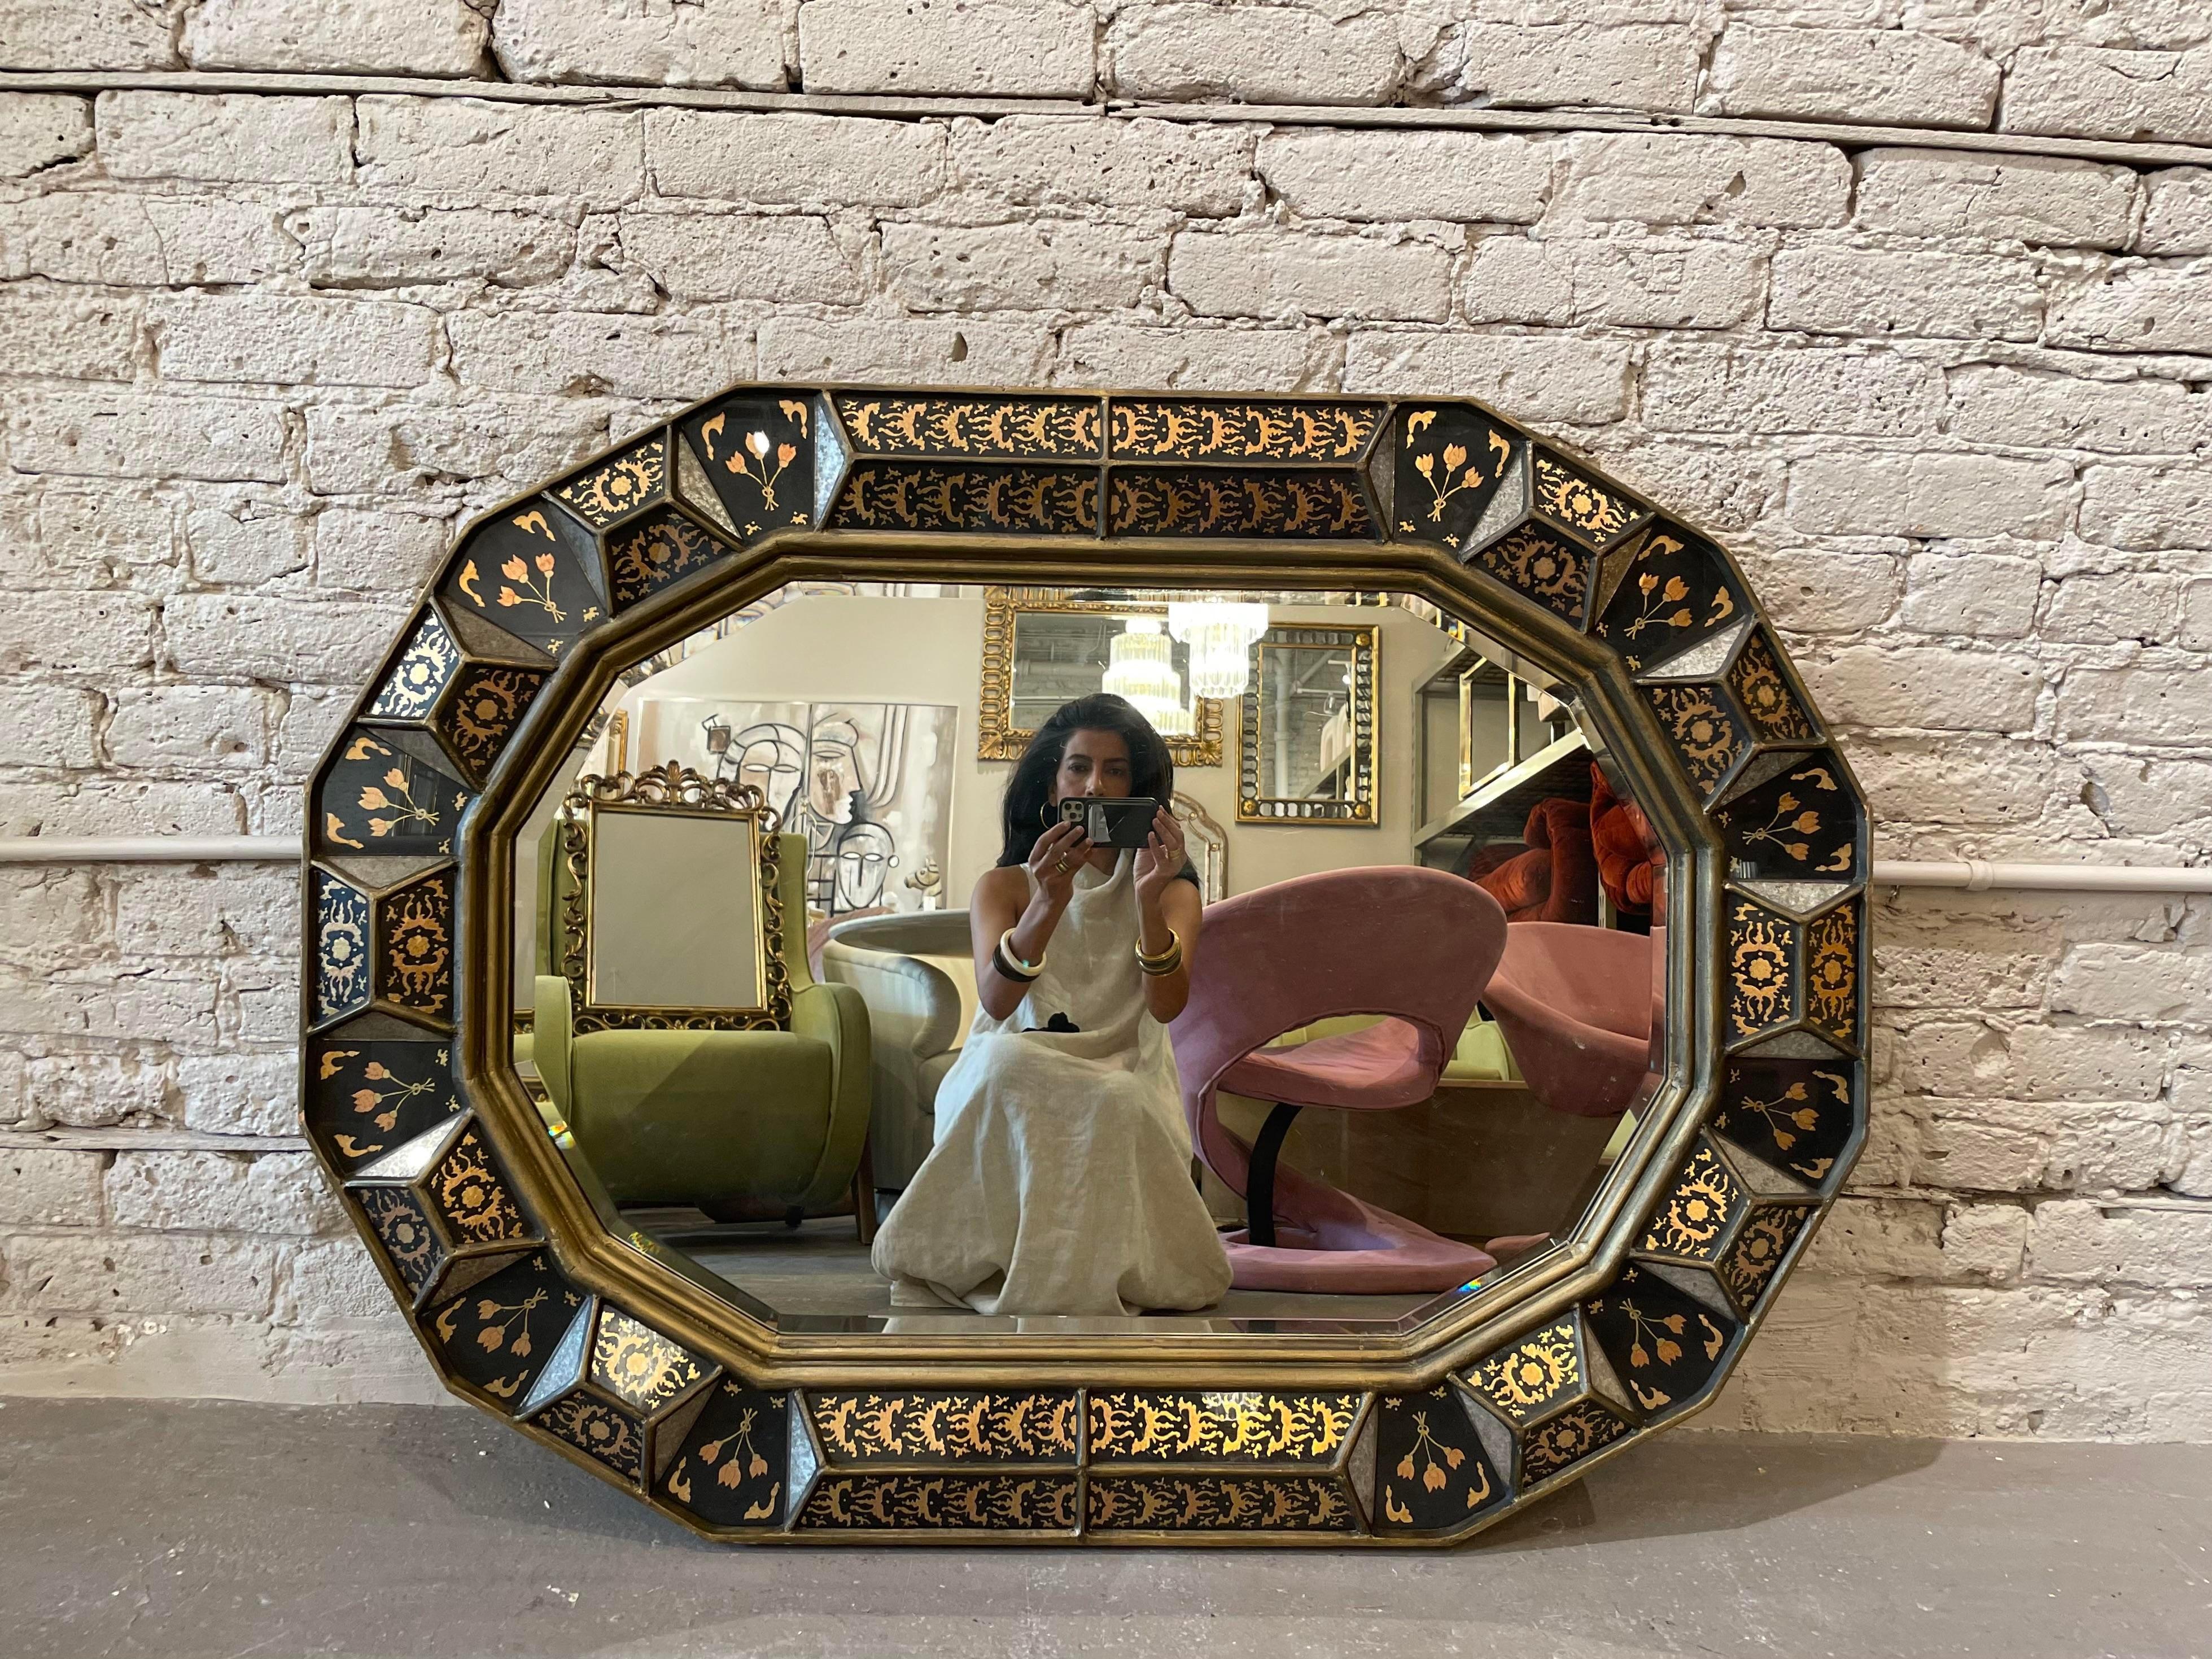 This stunning 12 sided eglomise style mirror from Baker Furniture has a geometric and dimensional frame. Gold trim, black panels, and gold details give boldness to the opulent design. The back has a label plaque marked “Baker / Furniture” and